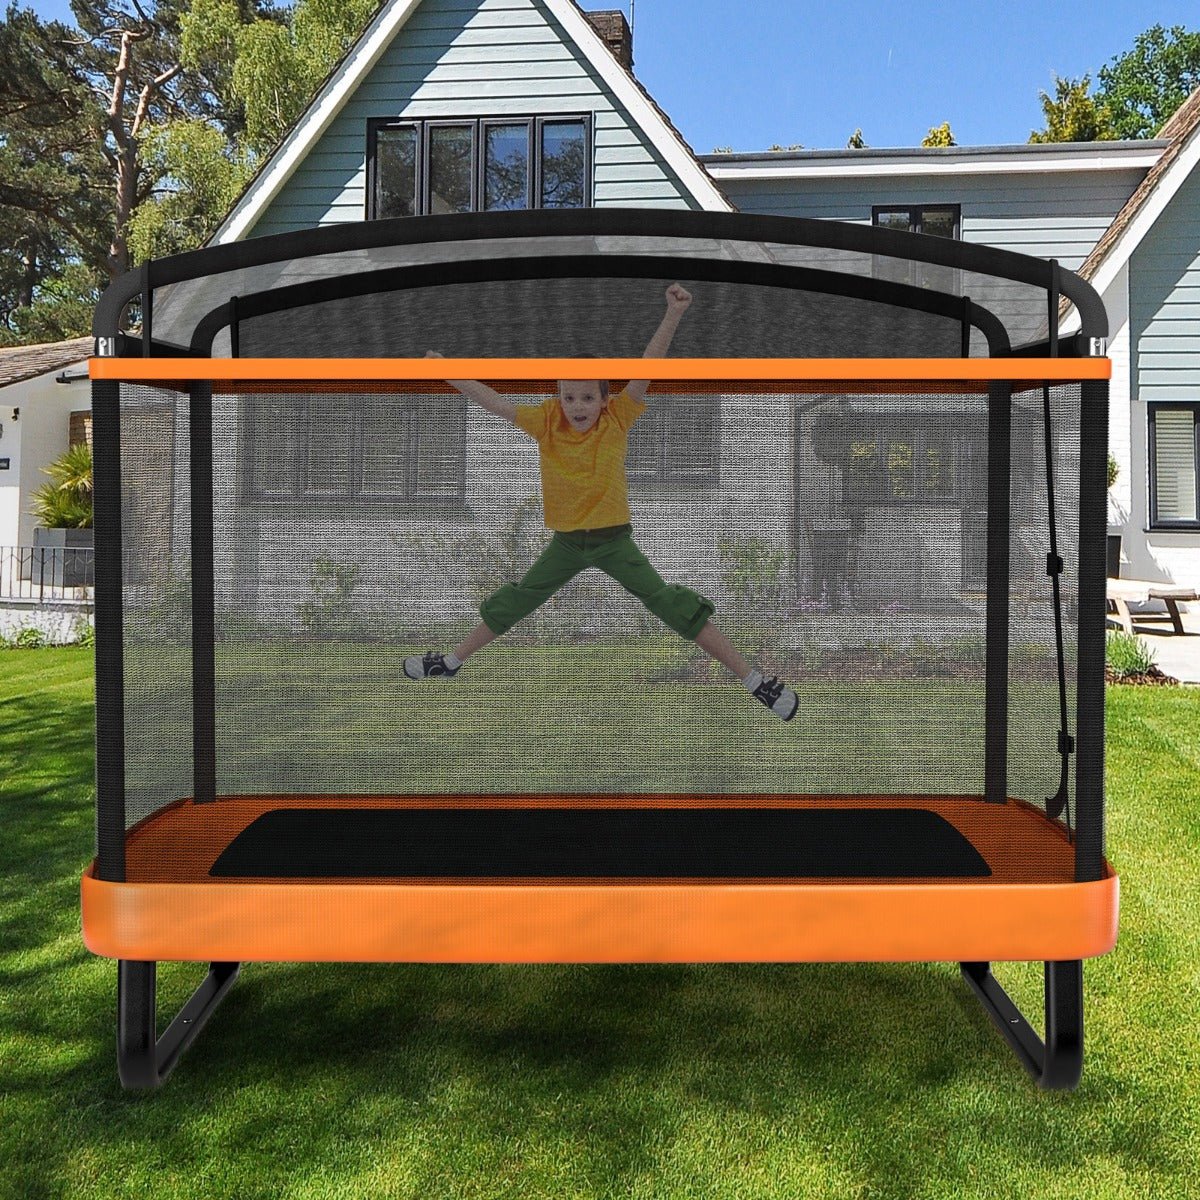 Playtime Excitement: Sturdy 6 FT Trampoline with Swing for Children